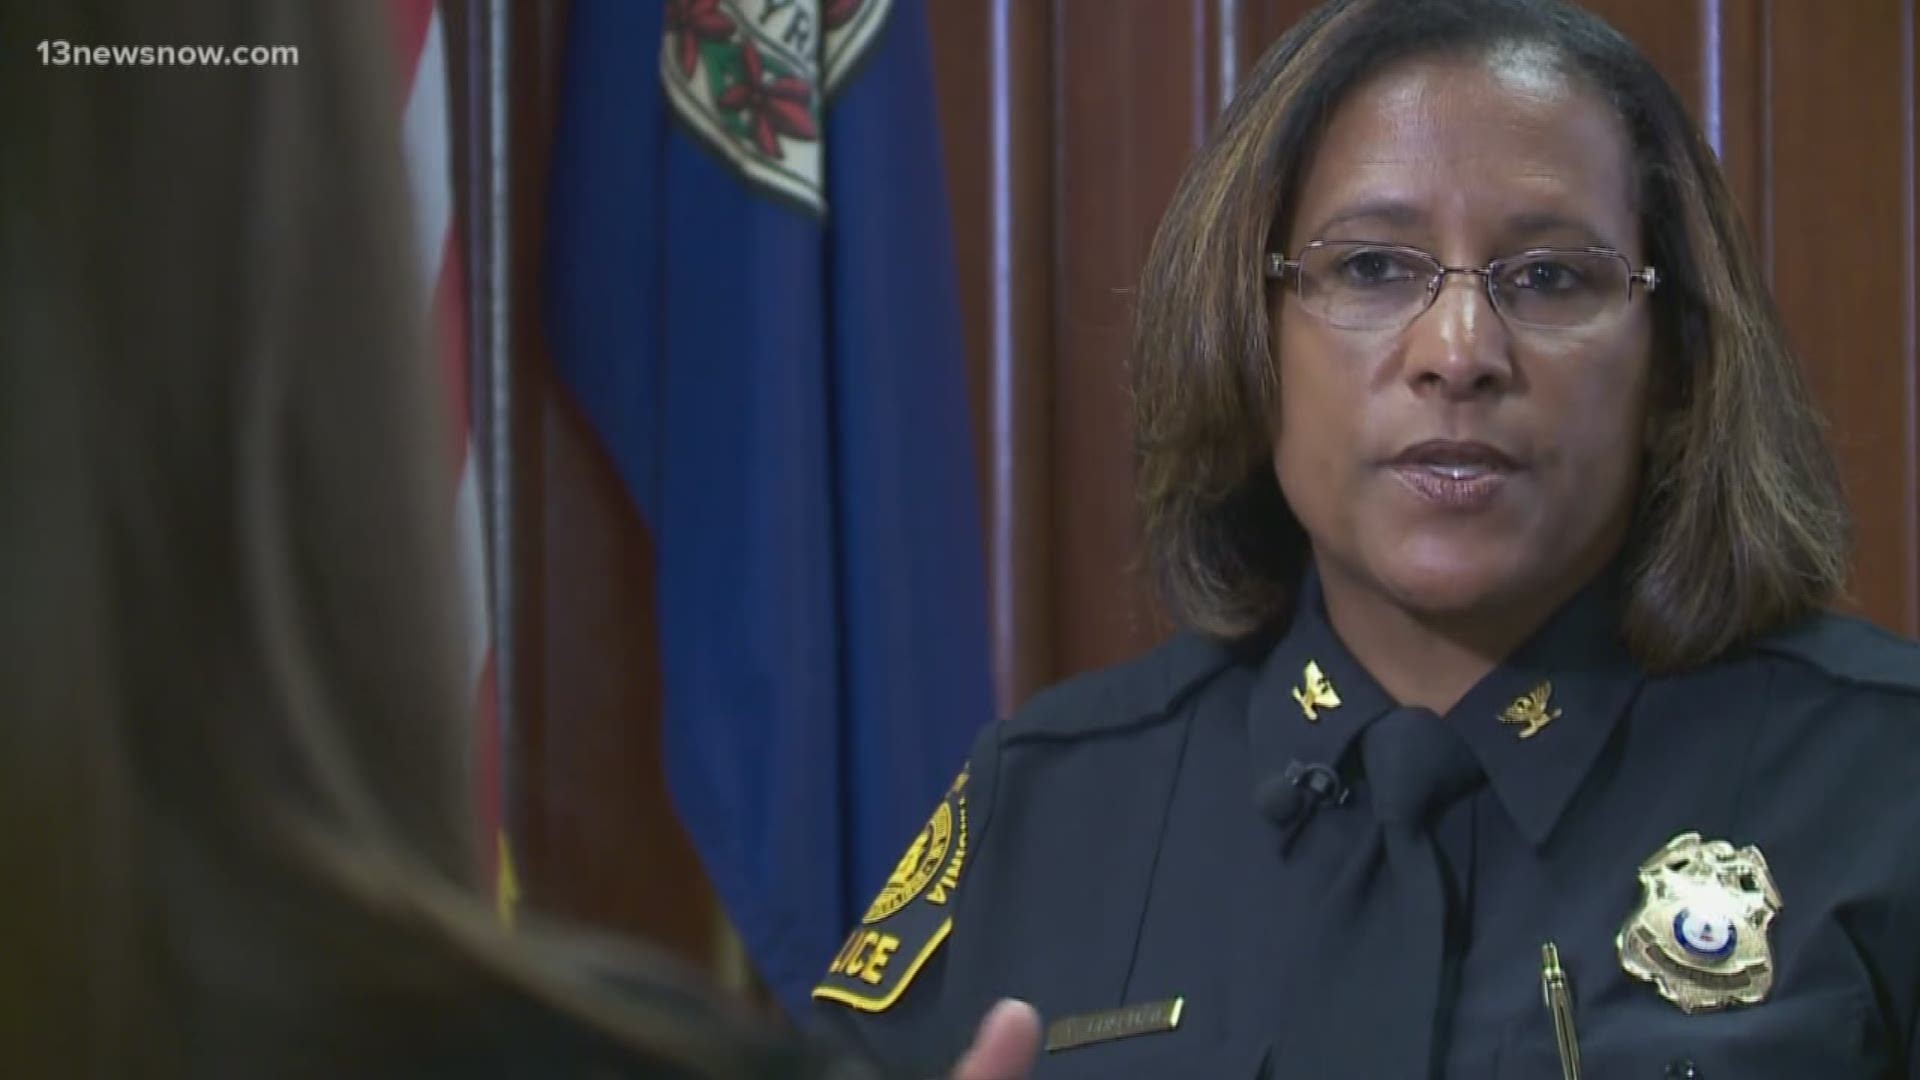 Former Police Chief Tonya Chapman released a statement detailing what she says happened during her resignation.